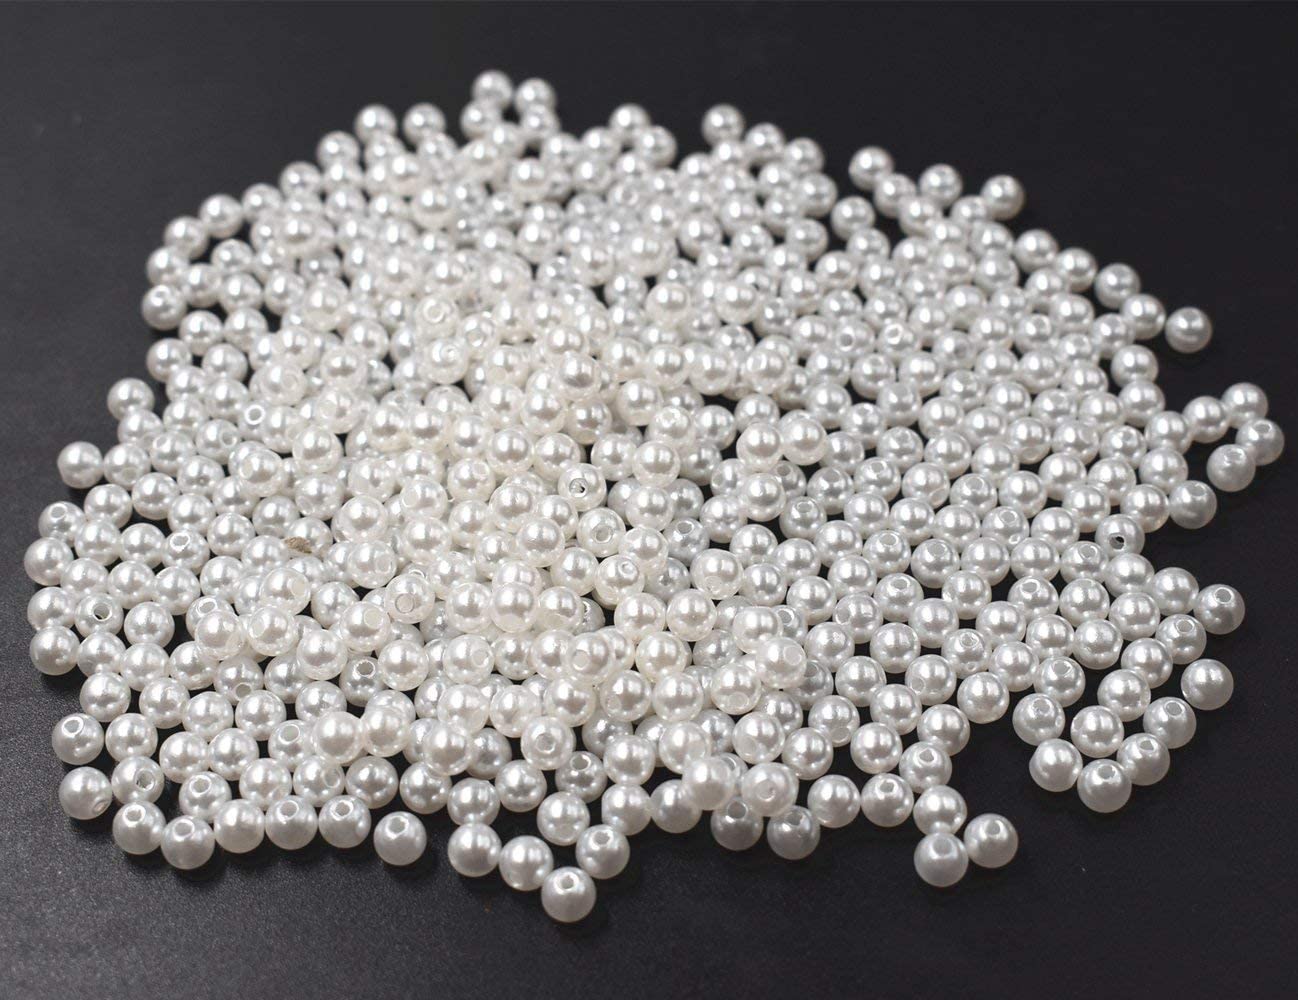 Lamansh Raw materials for Flower jewellery White / 1 Packet of 500 Grams 500 Grams Packet of Round Shape White Pearl/Moti Beads for Jewellery and Decoration (8 mm)